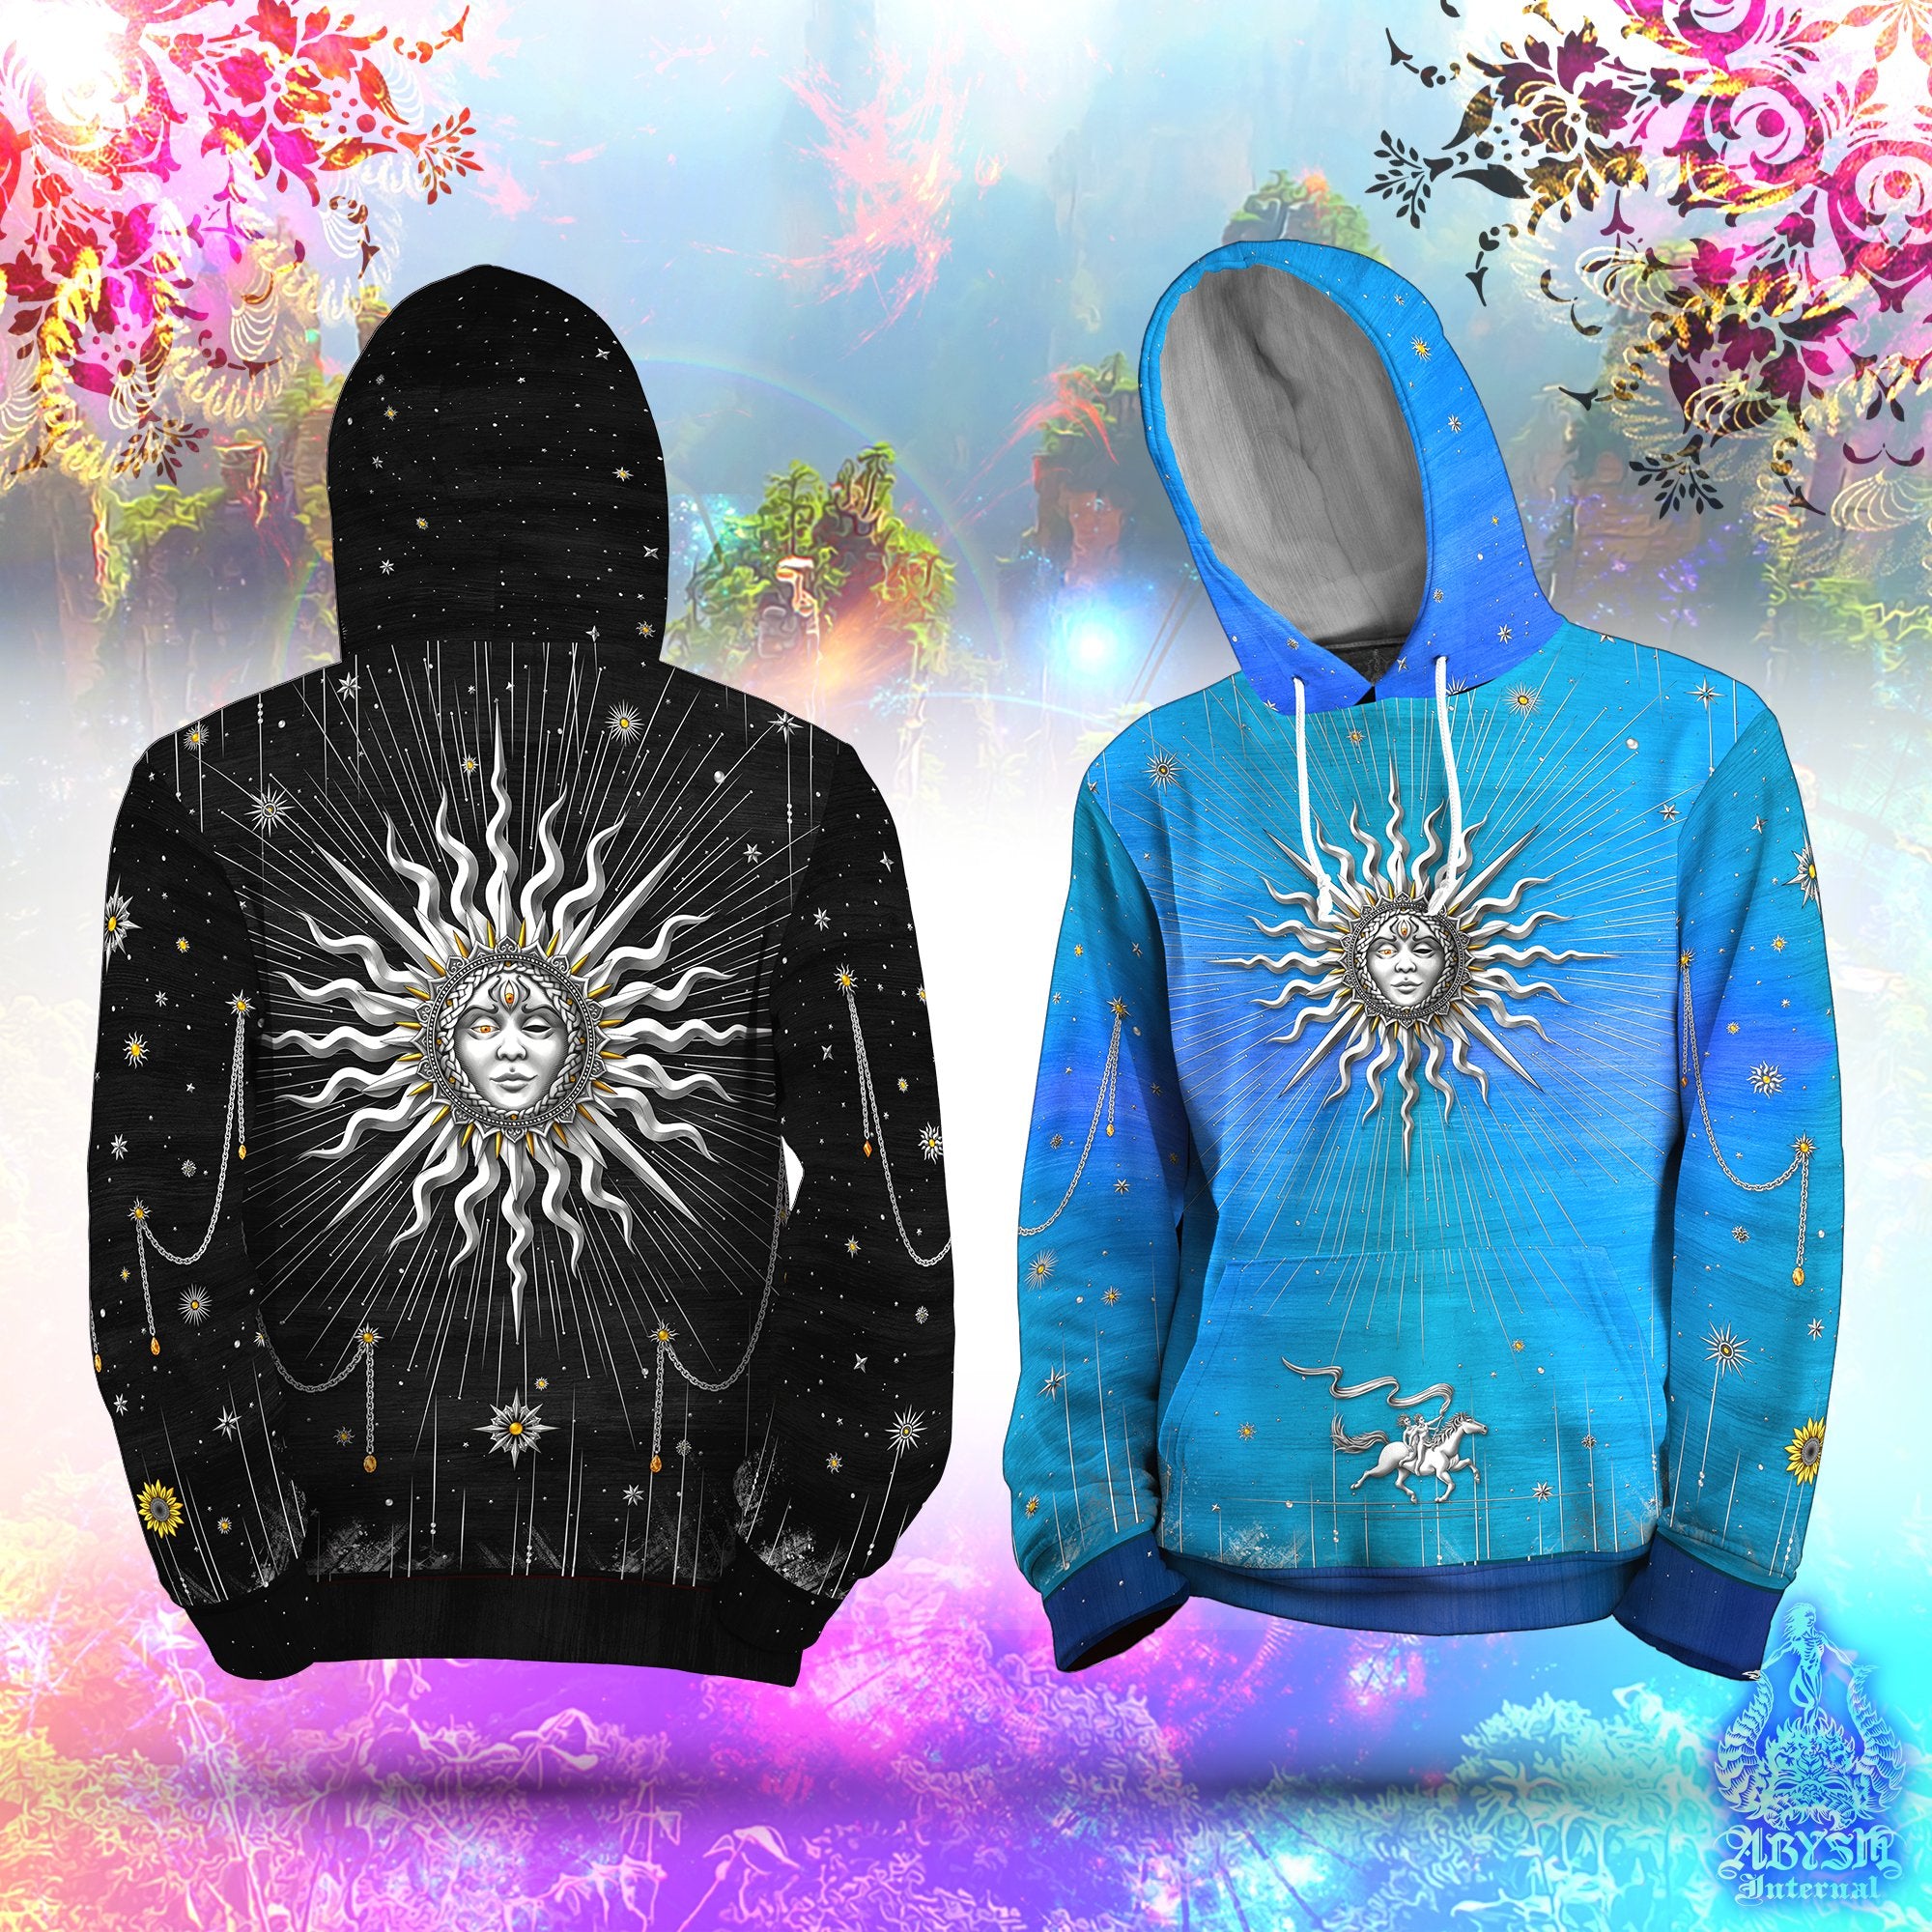 Silver Sun Hoodie, Tarot Arcana Pullover, Boho Sweater, Magic Street Outfit, Positive Streetwear, Indie Clothing, Good Fortune, Unisex - 7 Colors - Abysm Internal